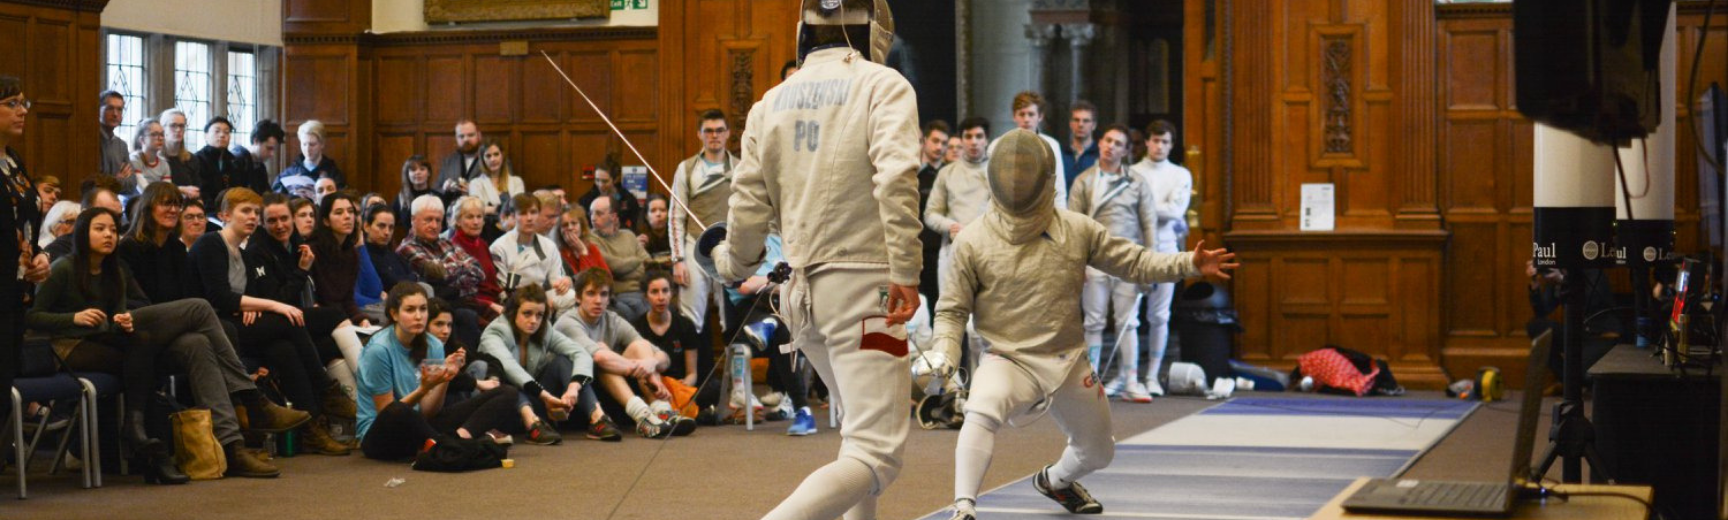 Two fencers competing with a large crowd watching on